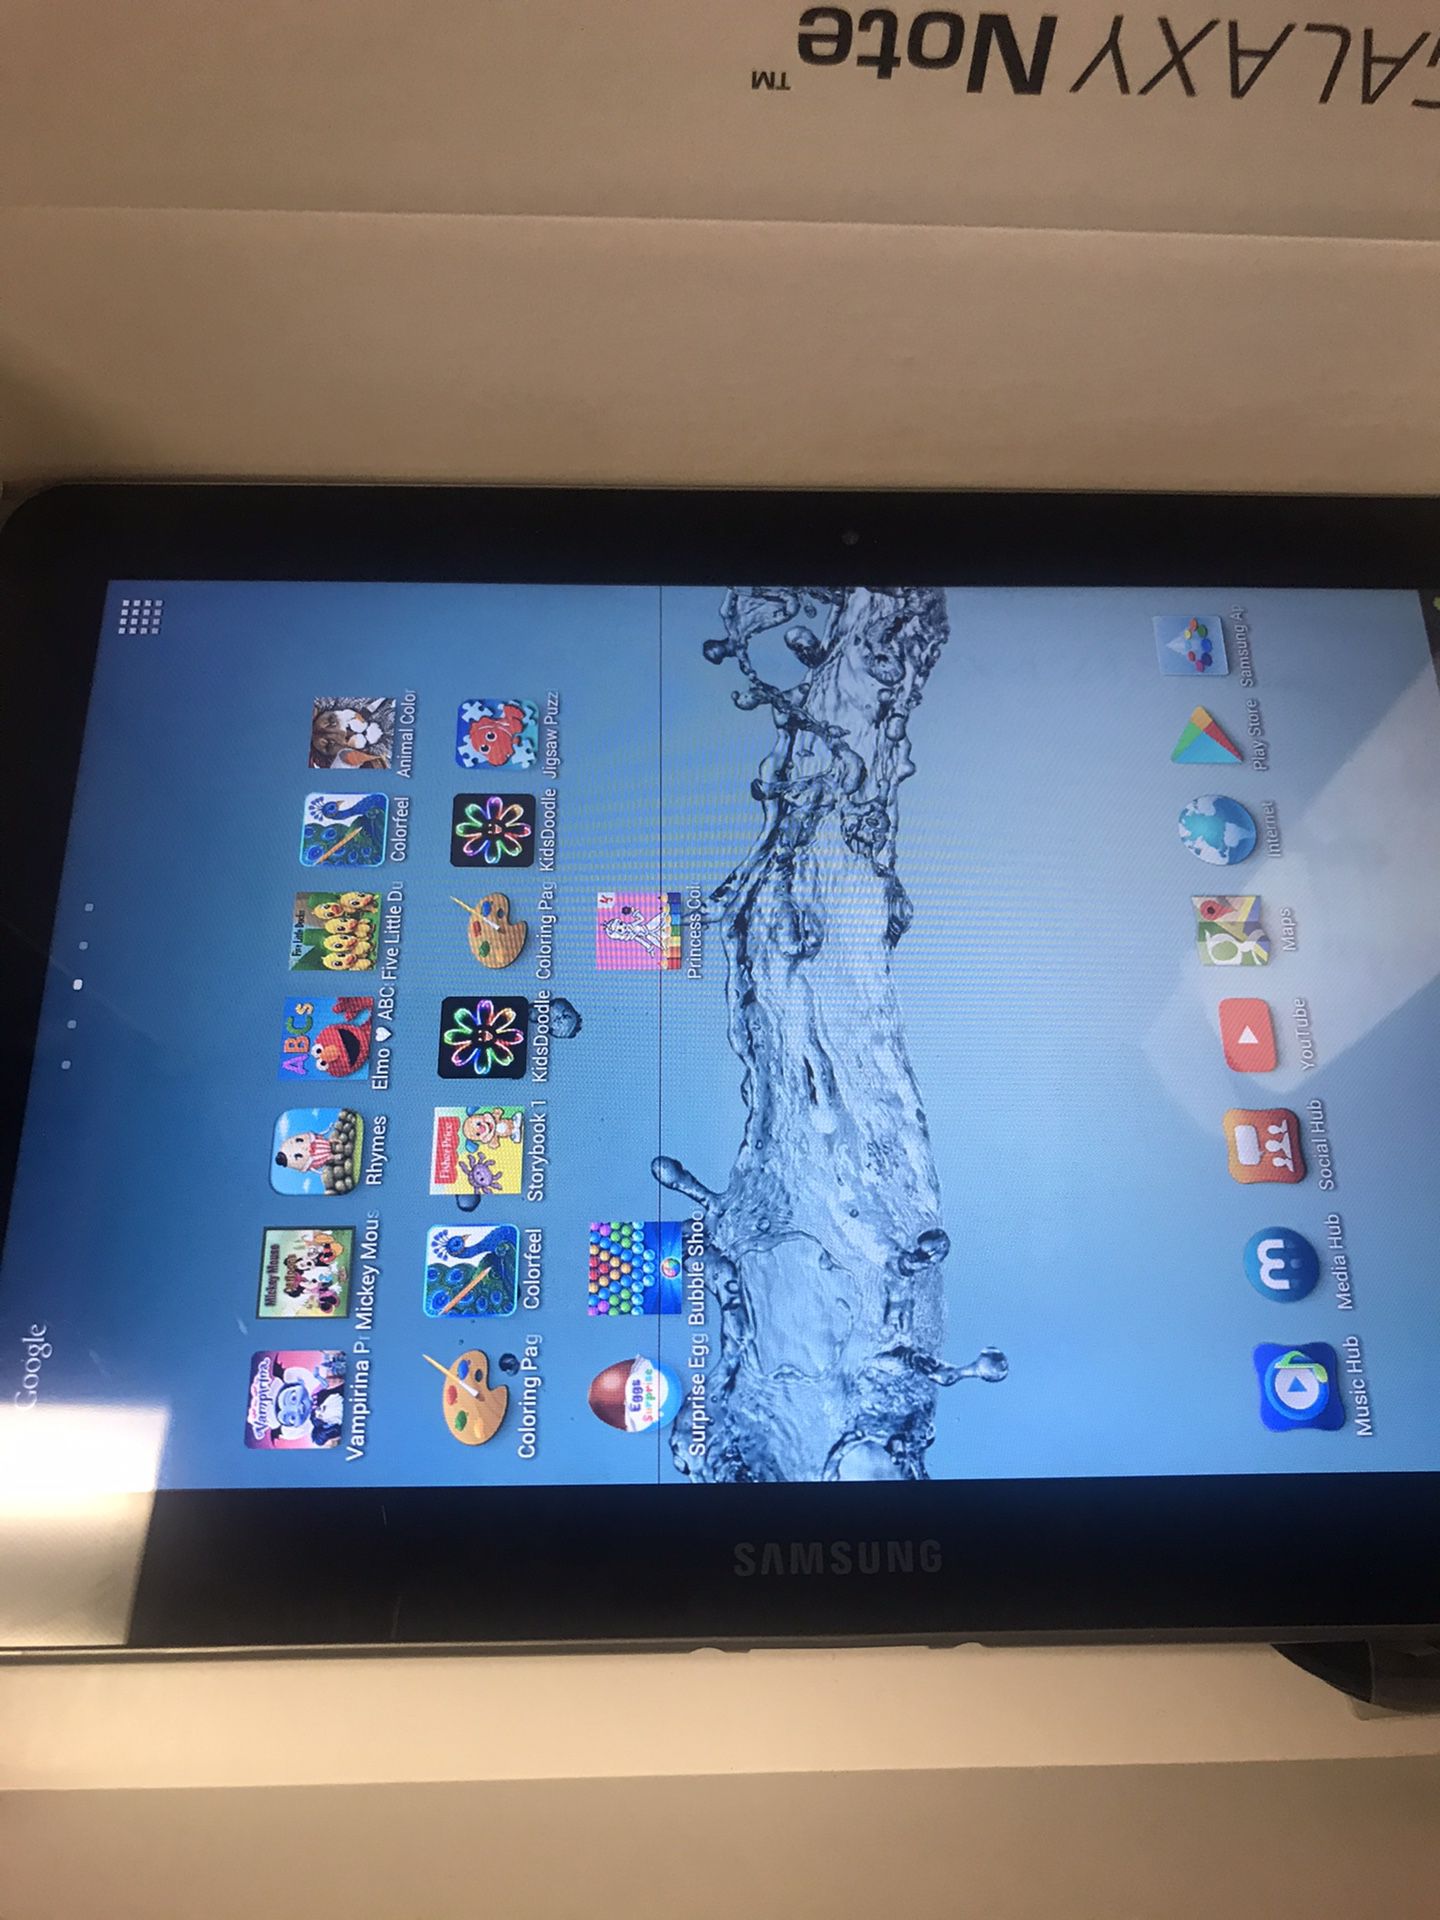 Samsung galaxy tablet 10.1 with charger small red line in screen